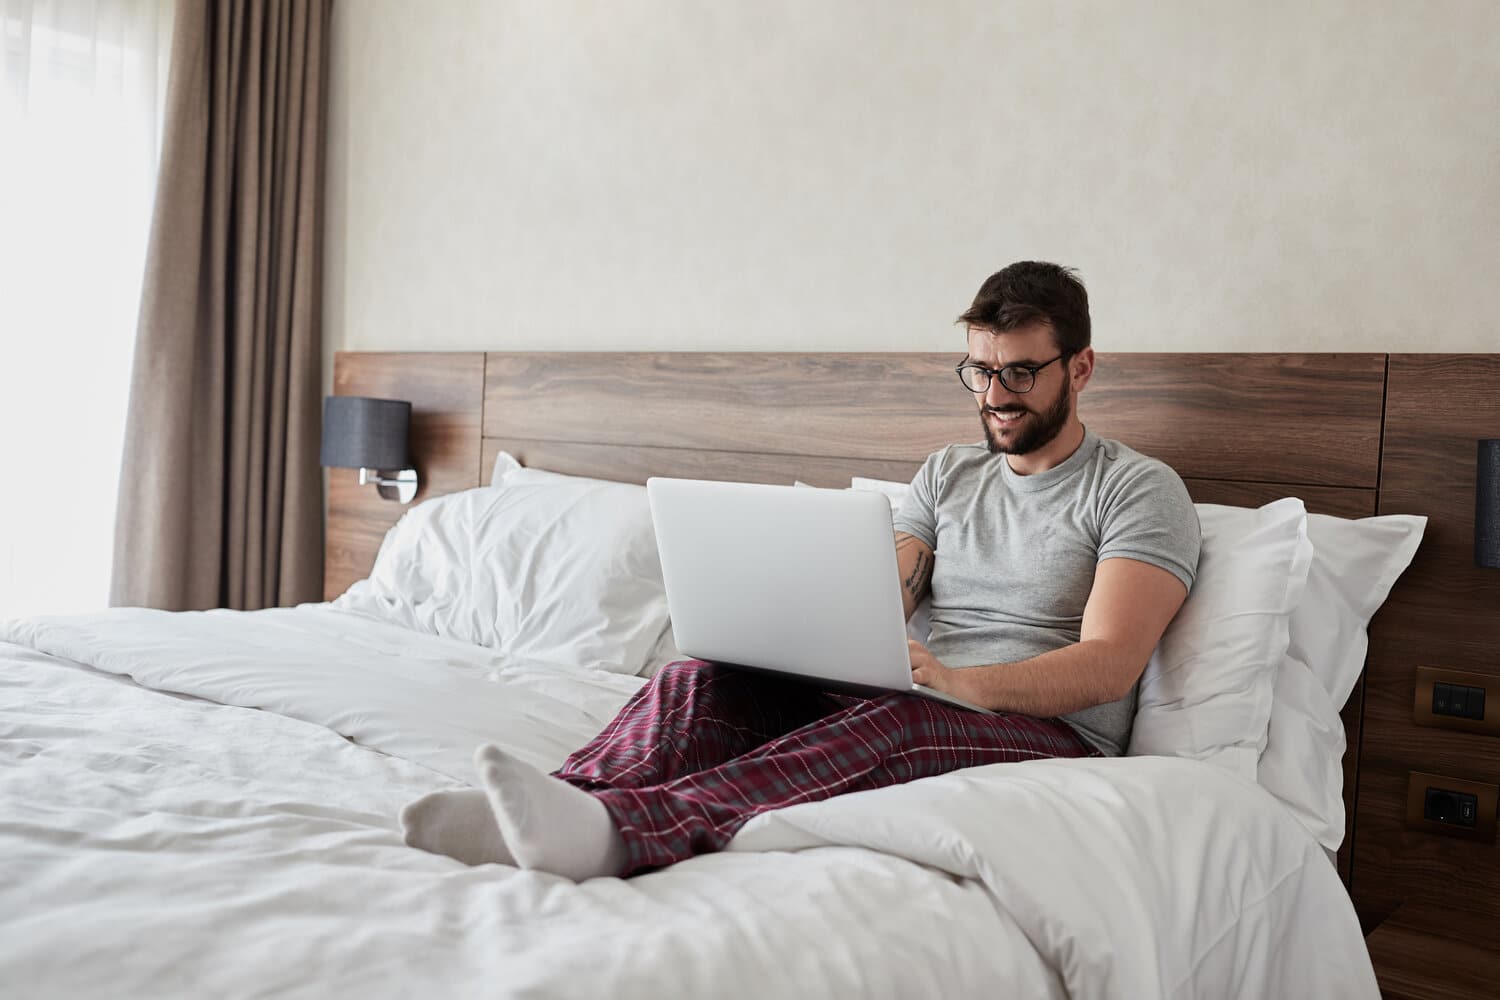 How to Improve Back Pain While Working From Bed